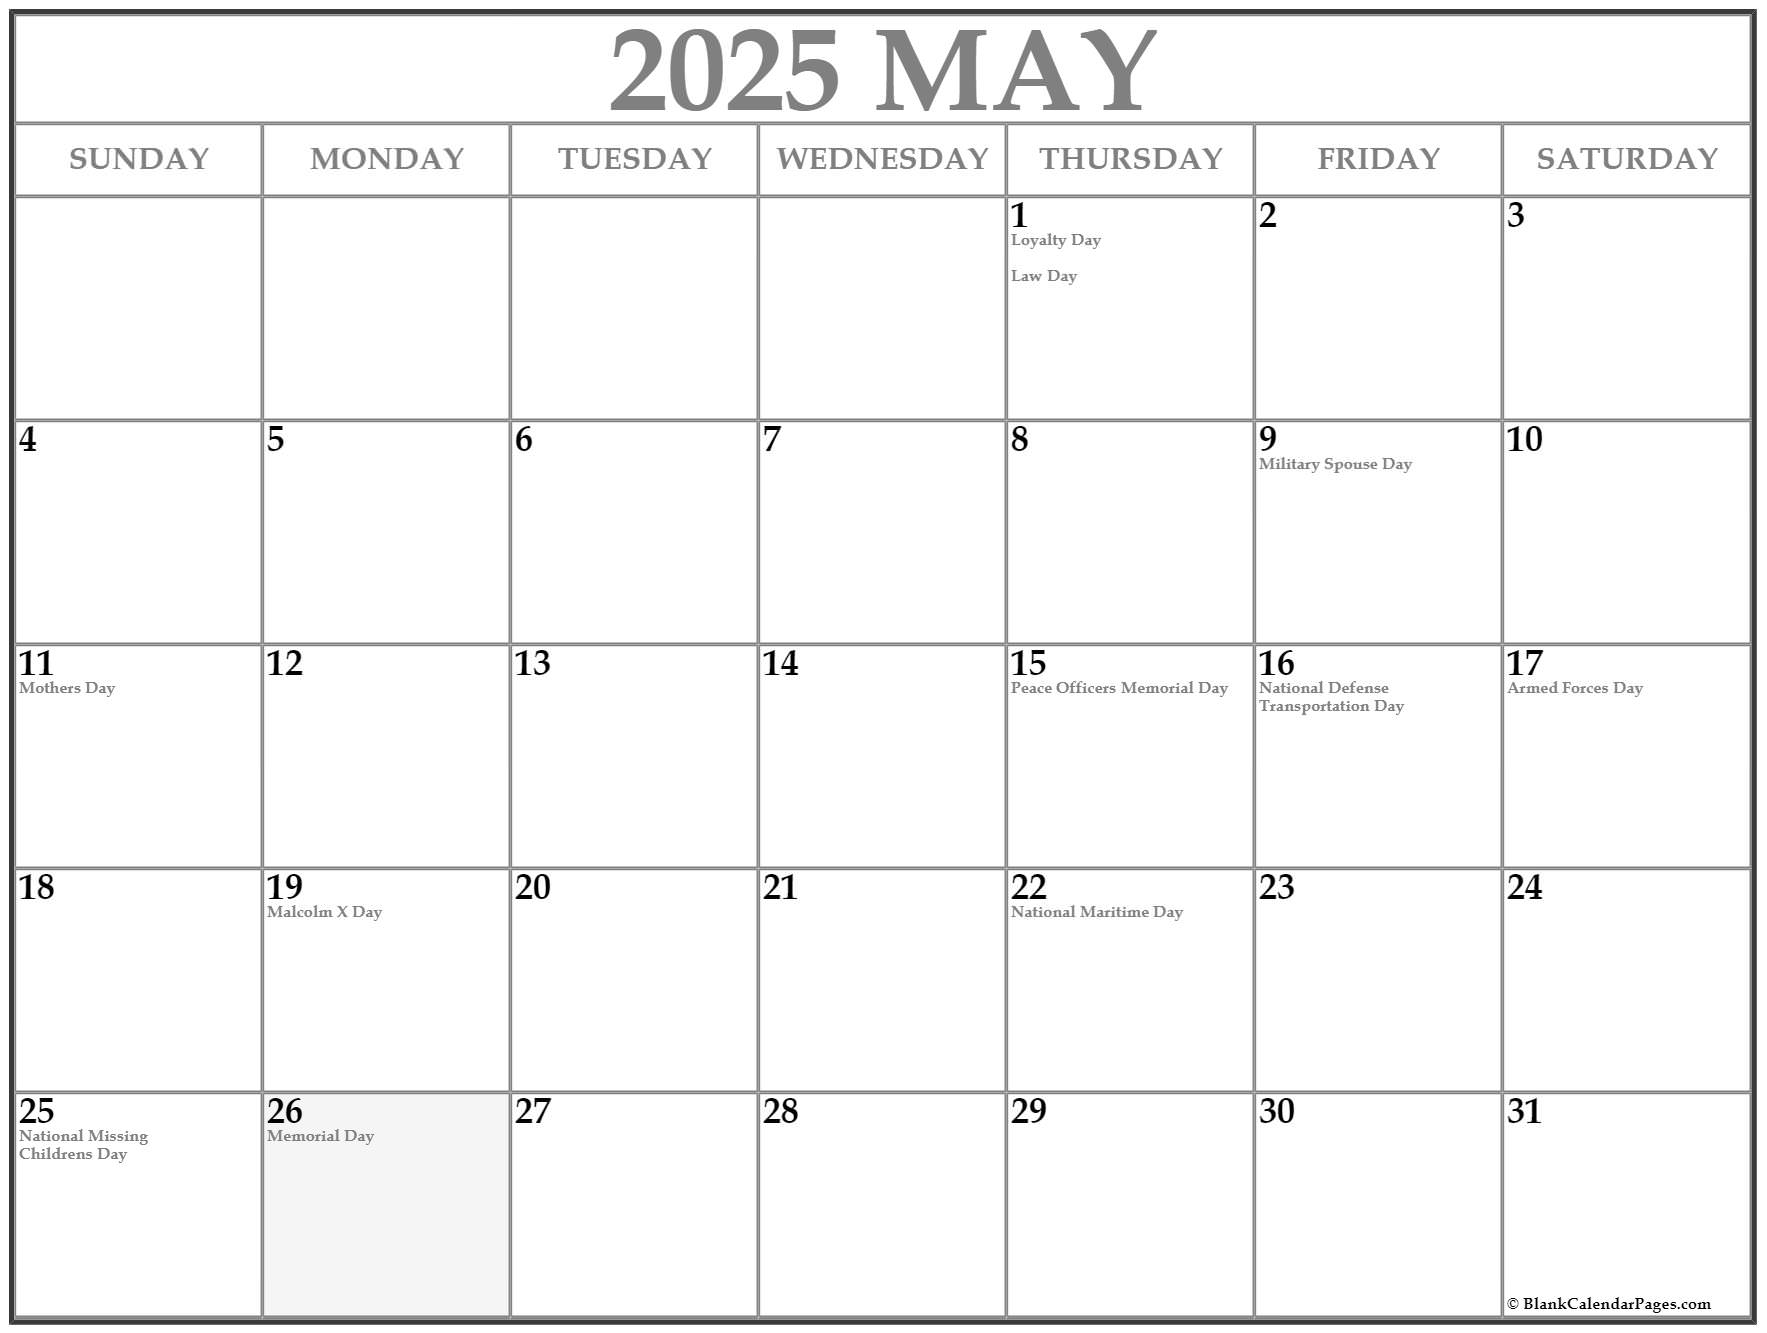 may-2025-with-holidays-calendar